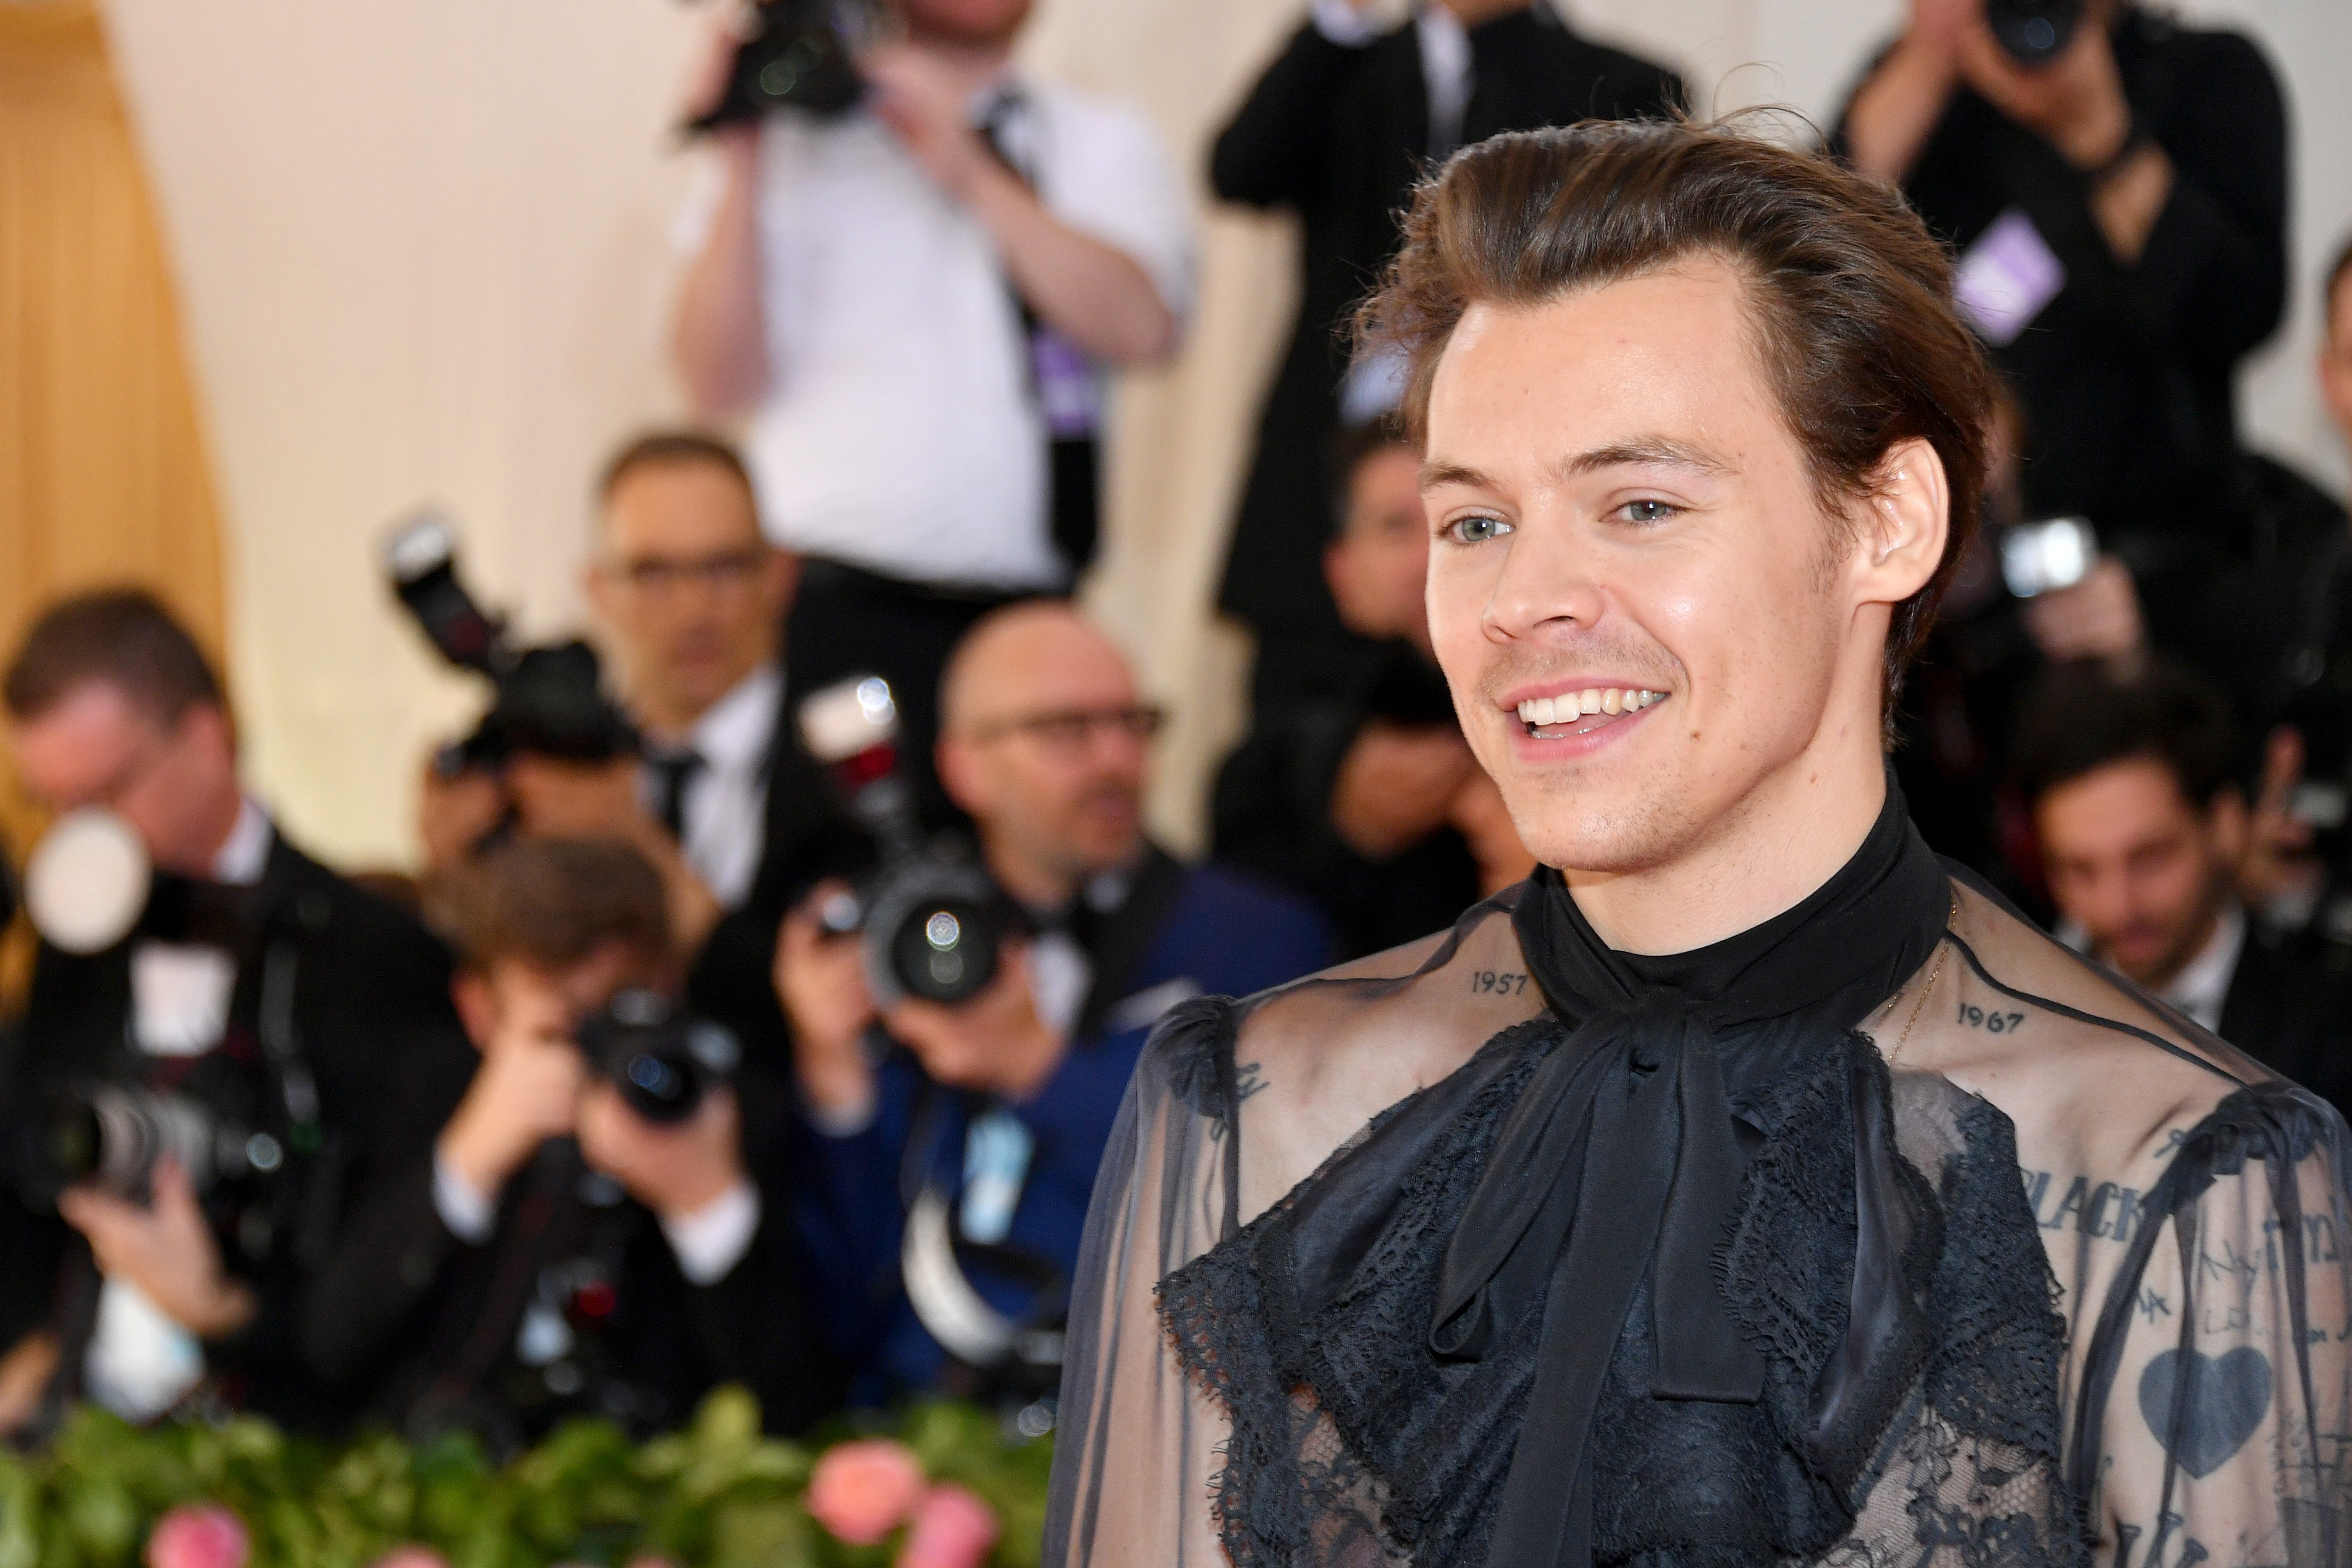 Harry Styles (Foto: Getty Images)